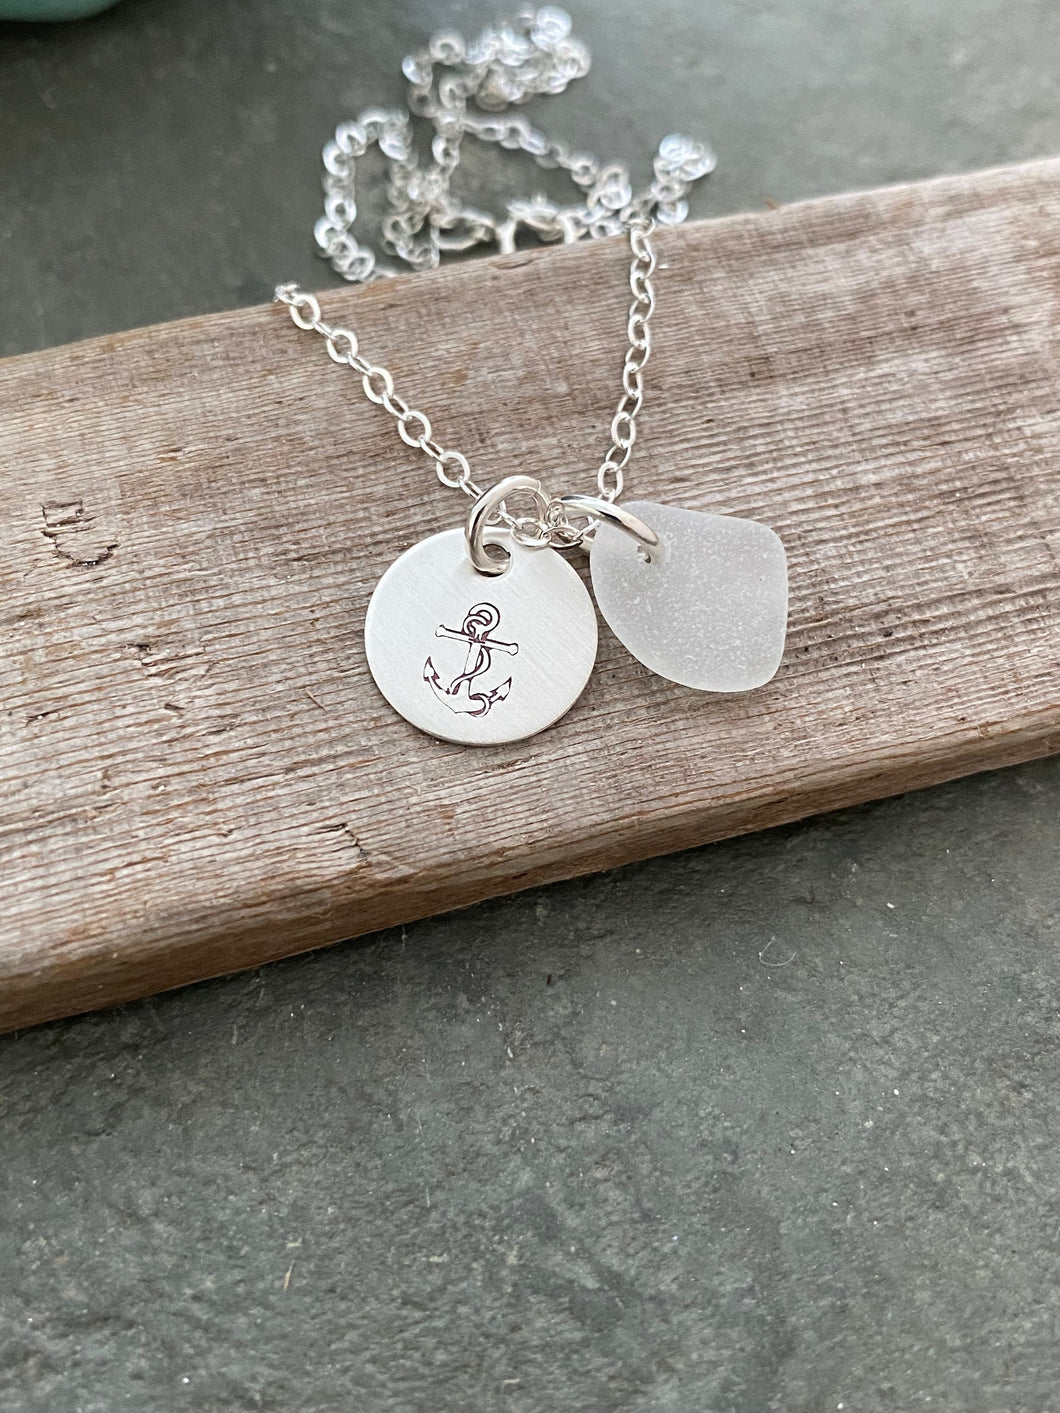 Sterling Silver Anchor Necklace with Sea Glass, Hope, Hand Stamped Sterling Disc, Anchor with Rope, Satin Finish, Simple Beach Necklace